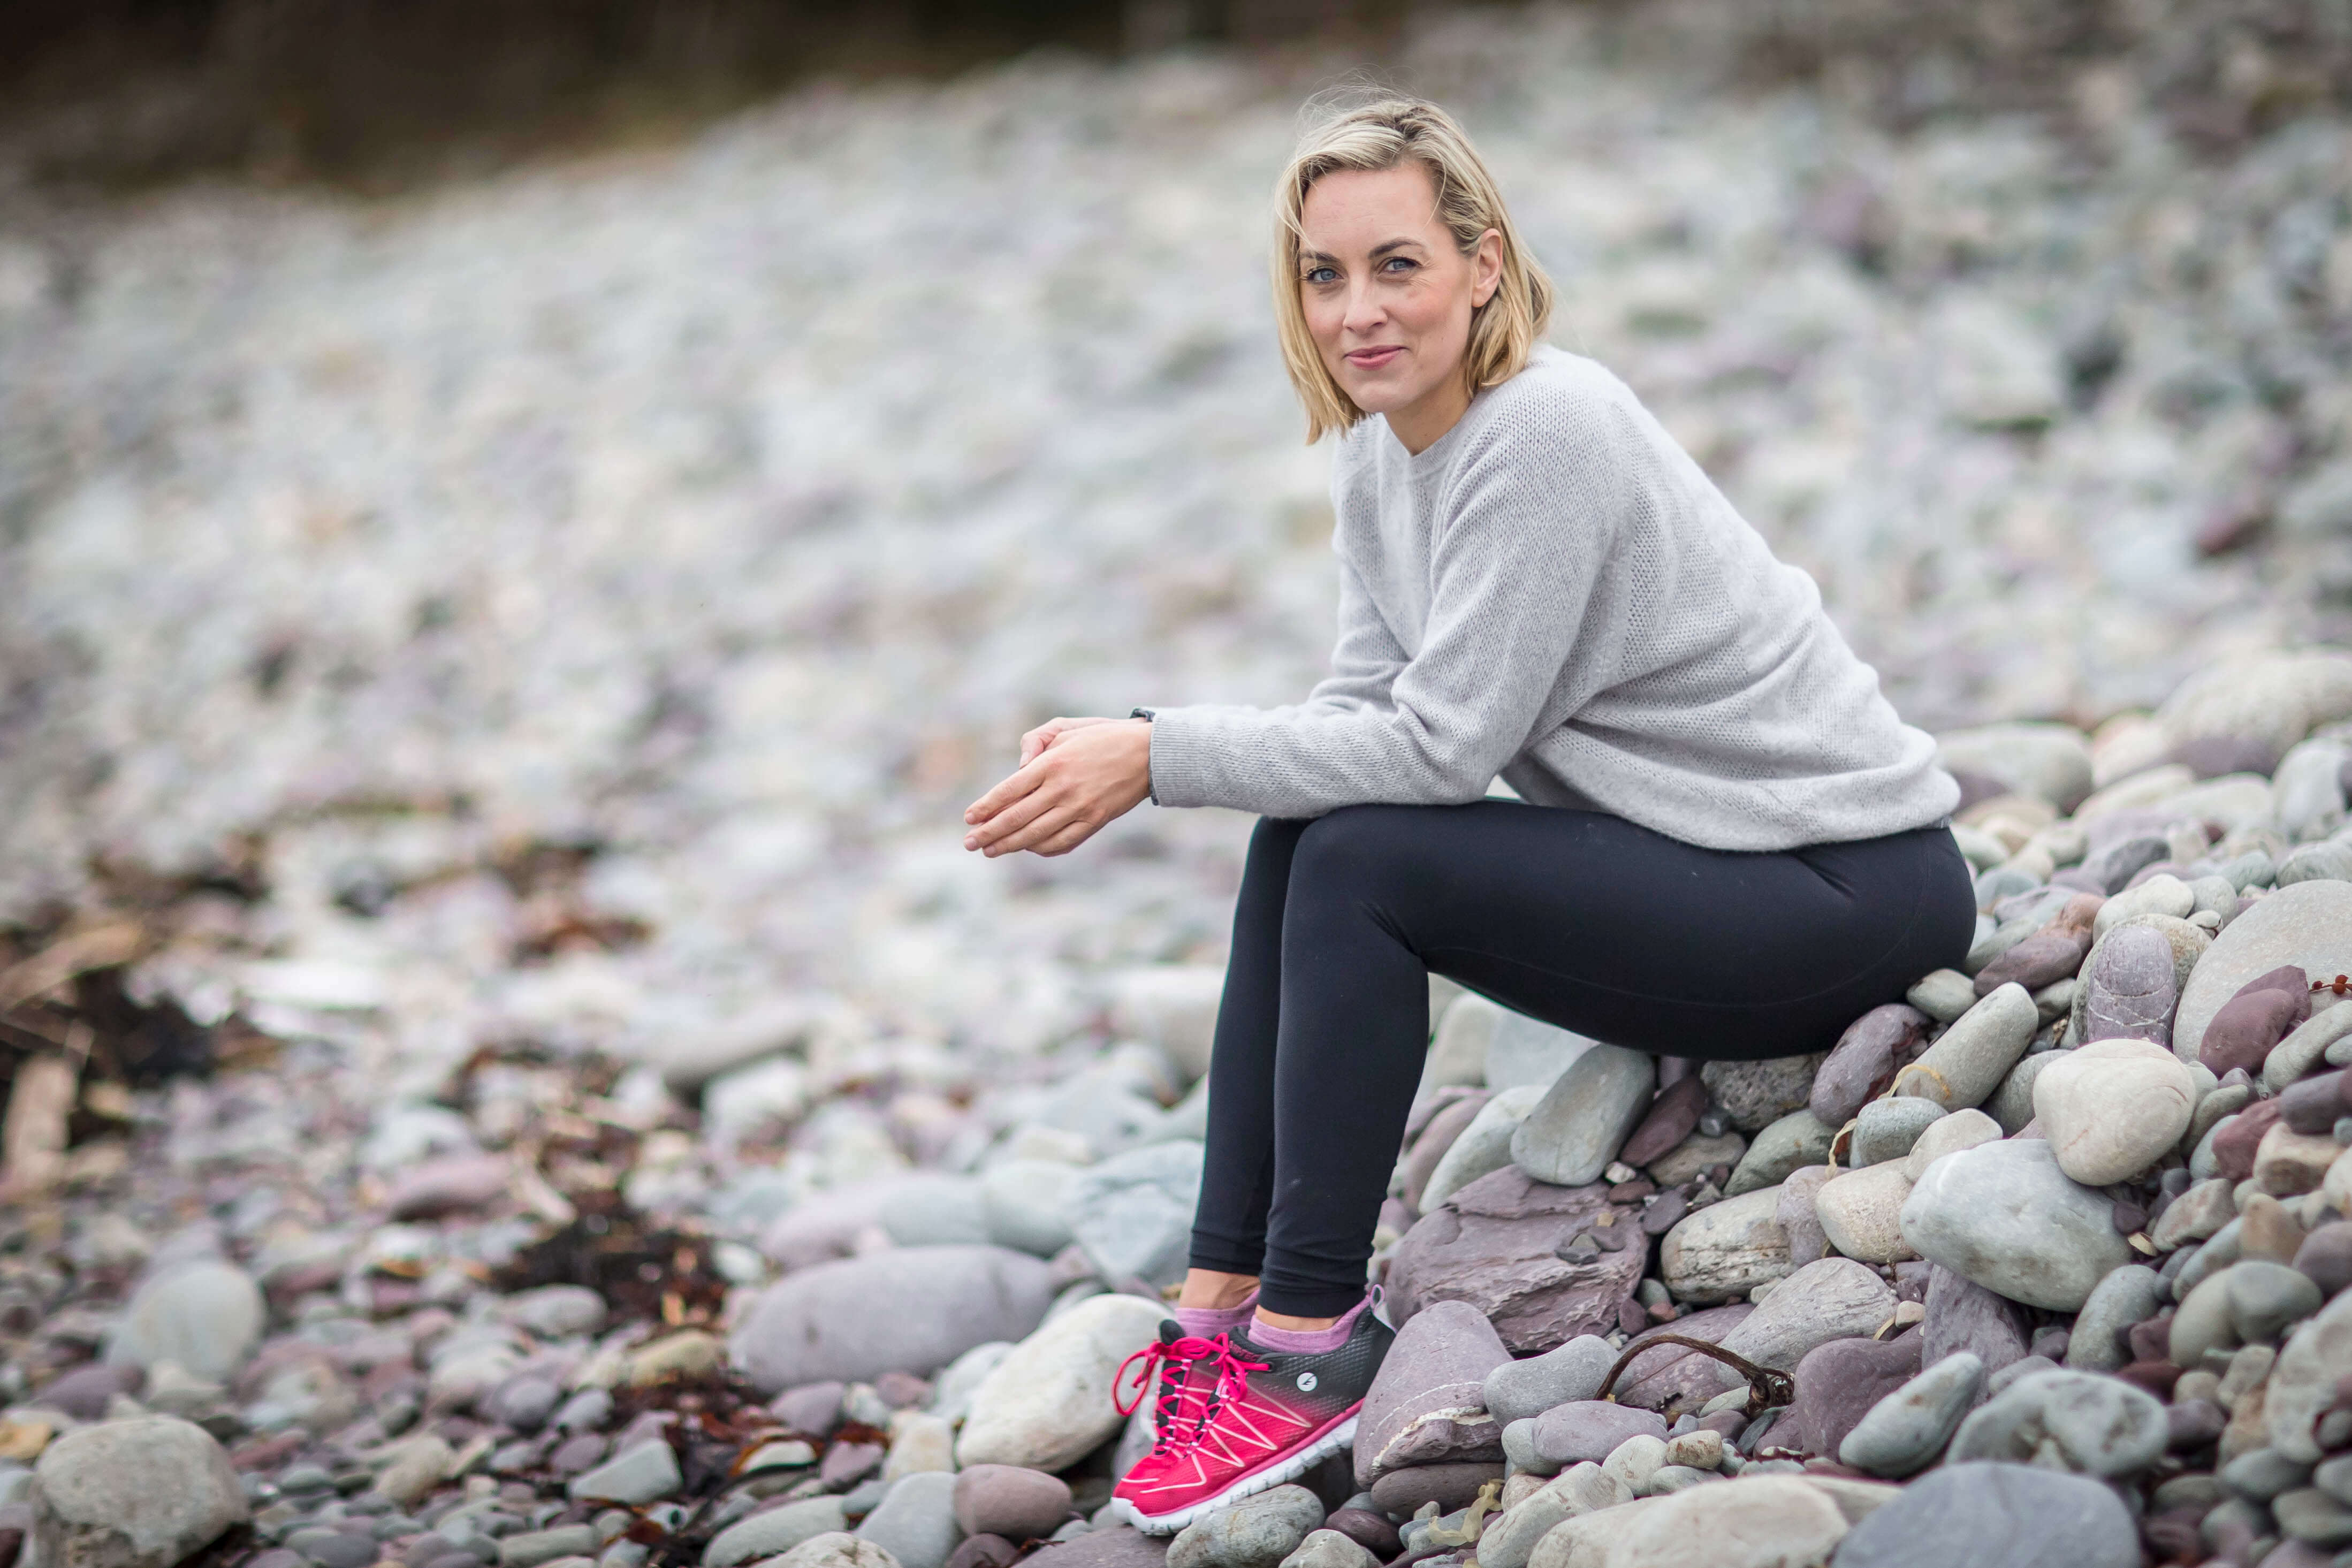 Kathryn Thomas Pure Results ireland no frontiers travel influencer wellness